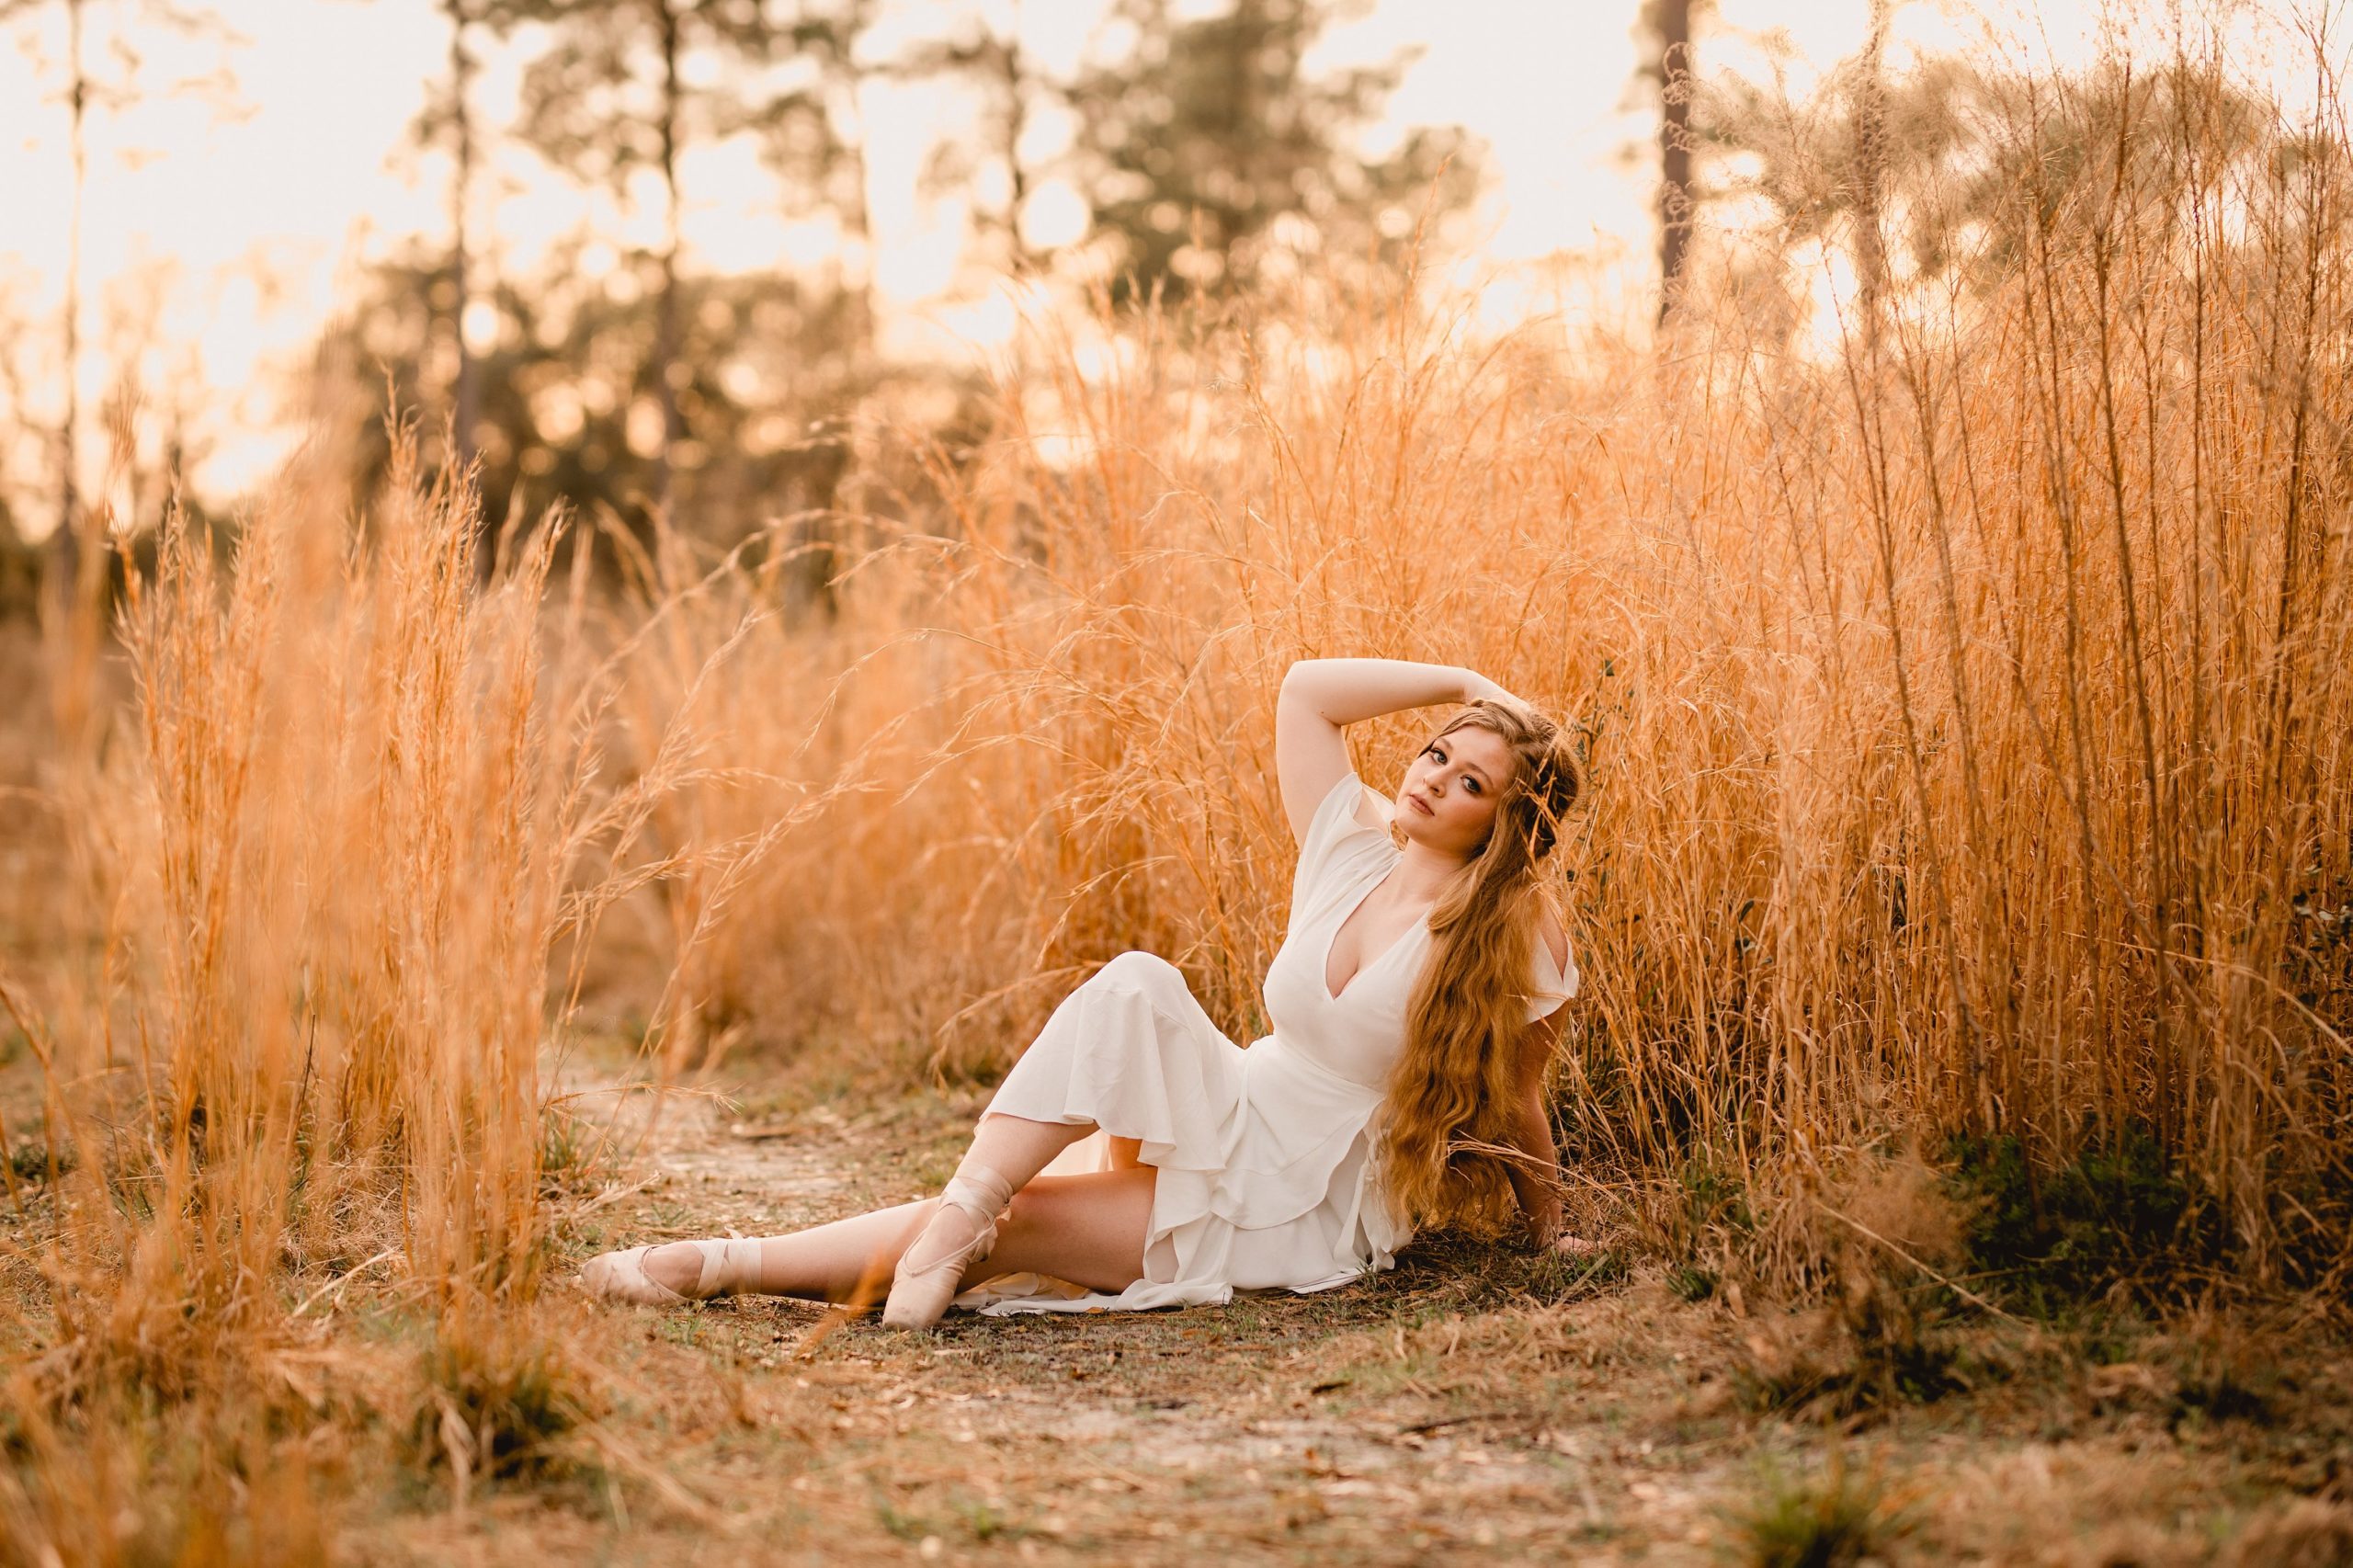 Dance senior pictures in north florida with tall grass and white dress. Pointe shoes.